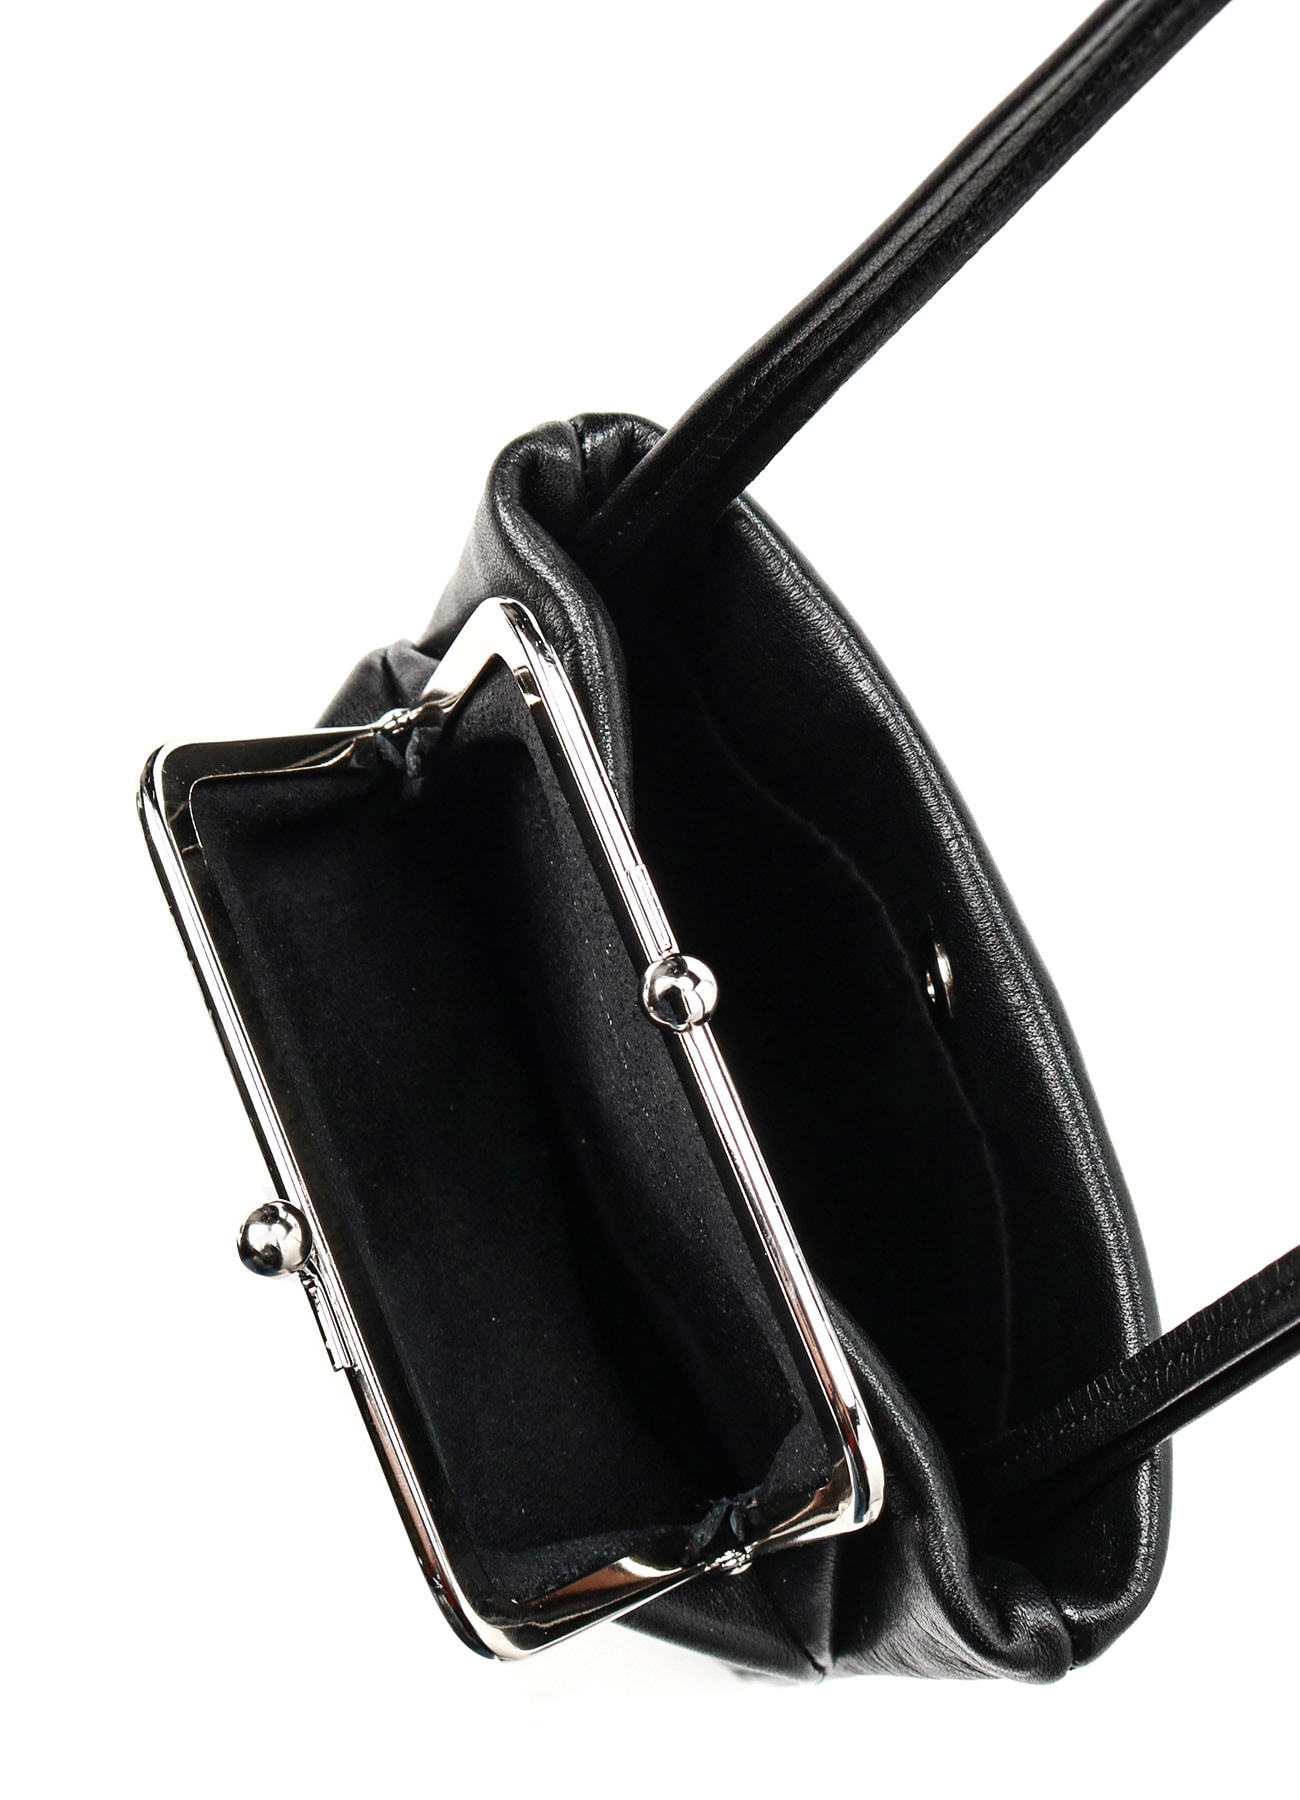 【7/17 12:00(JST) Release】COW LEATHER CLASP POCHETTE